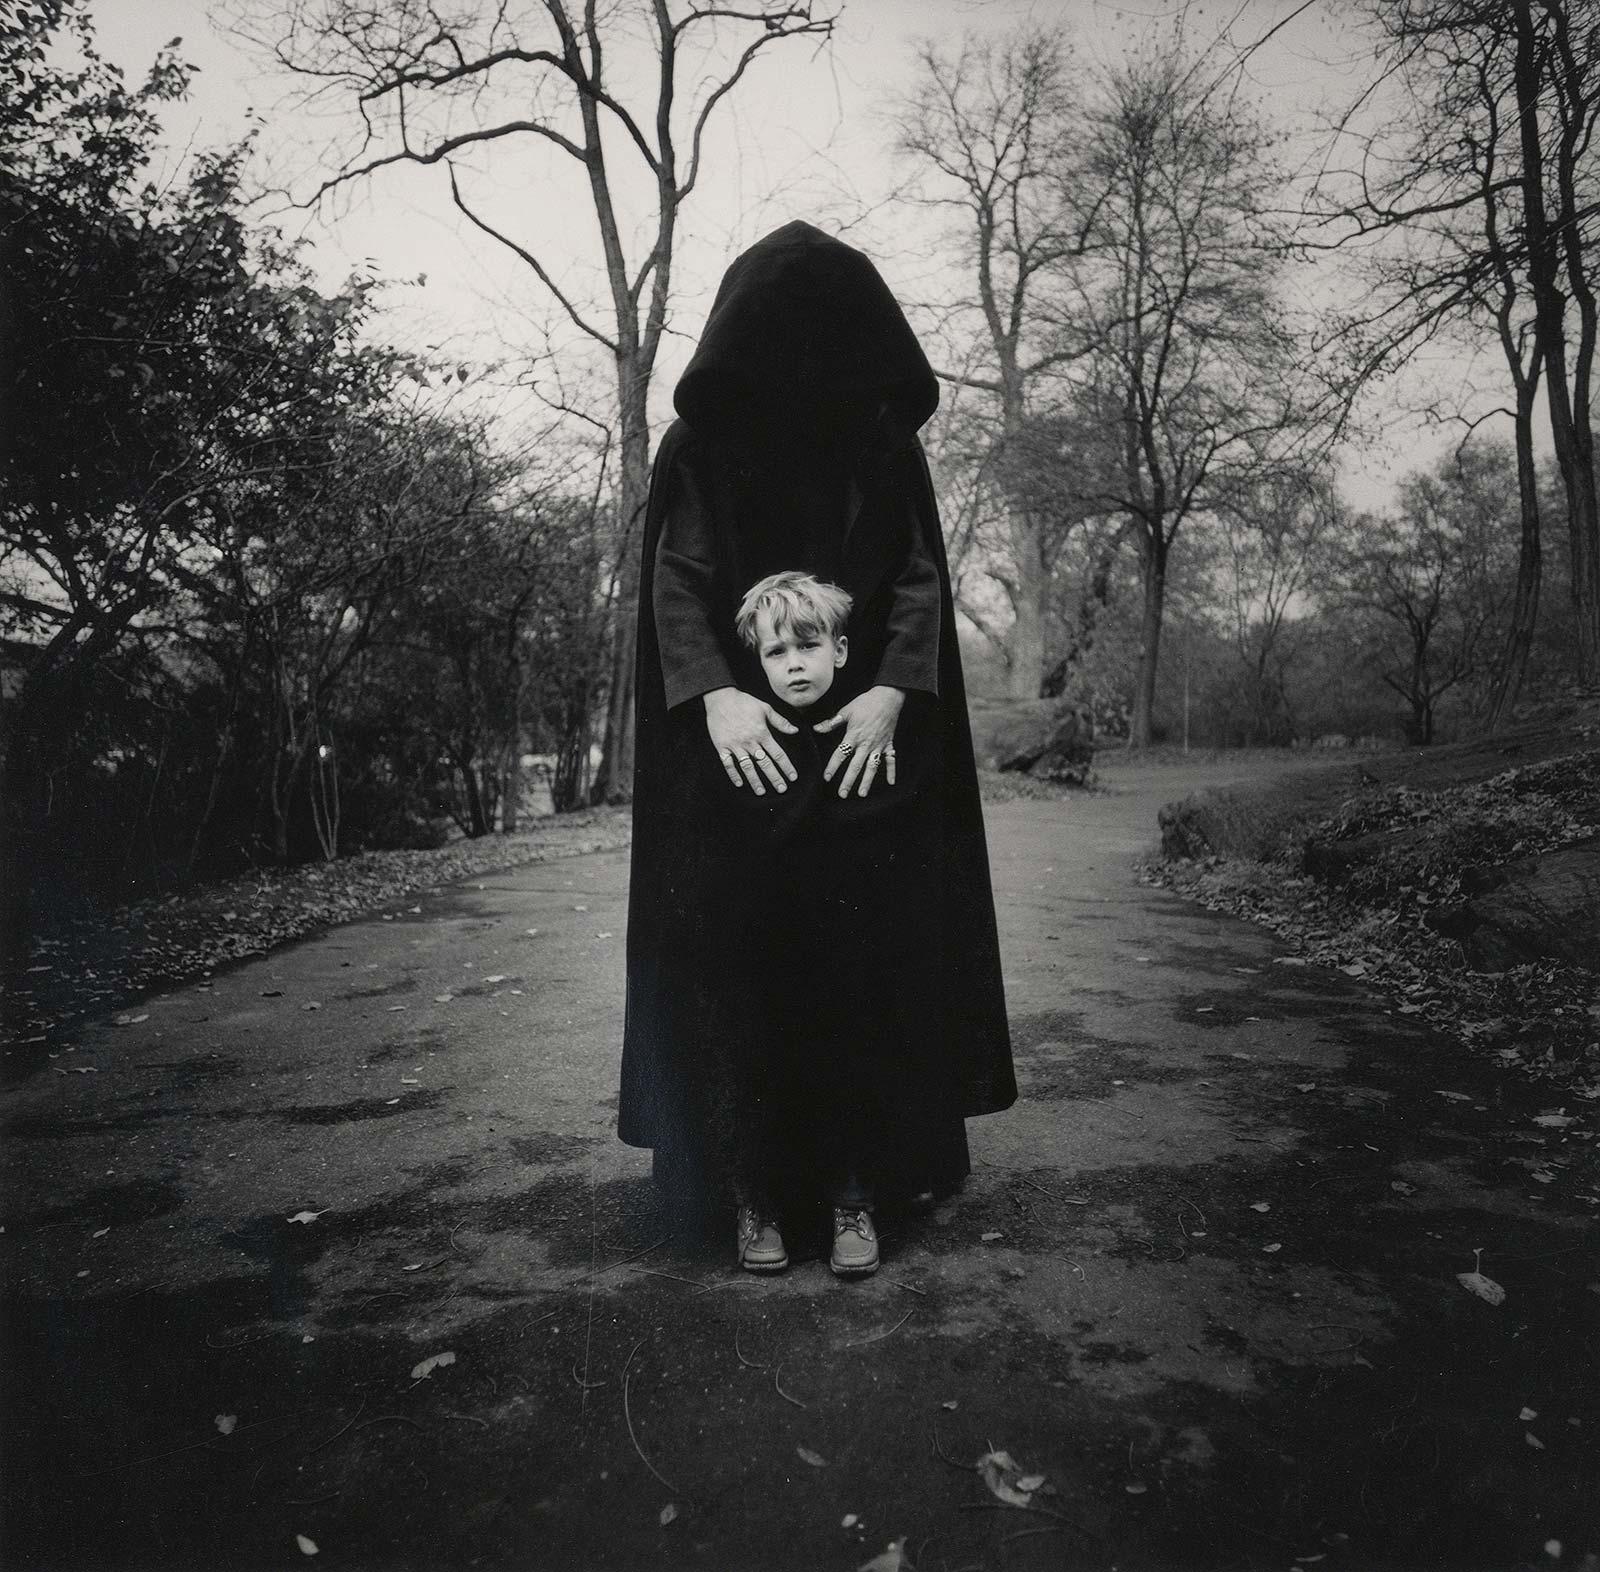 Arthur Tress Nude Photograph - Death Fantasy (a haunting image which portrays a boy's worst nightmare)